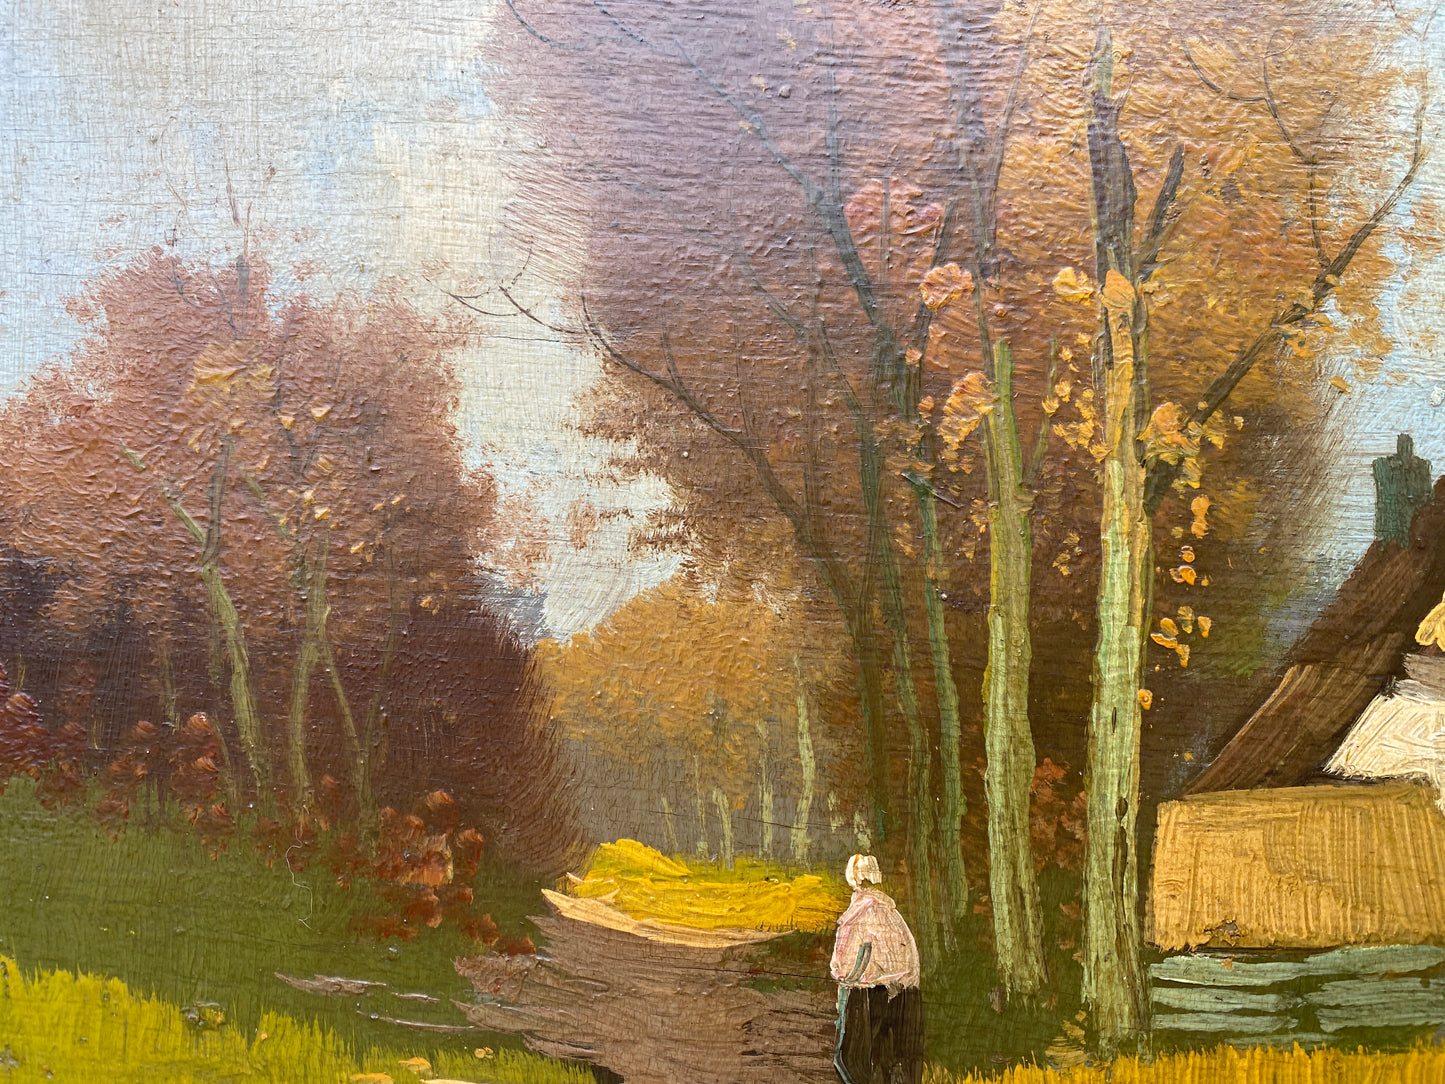 A Pair of Danish School 'Figure on Country Track Summer and Winter' c1920s Oil on Wood